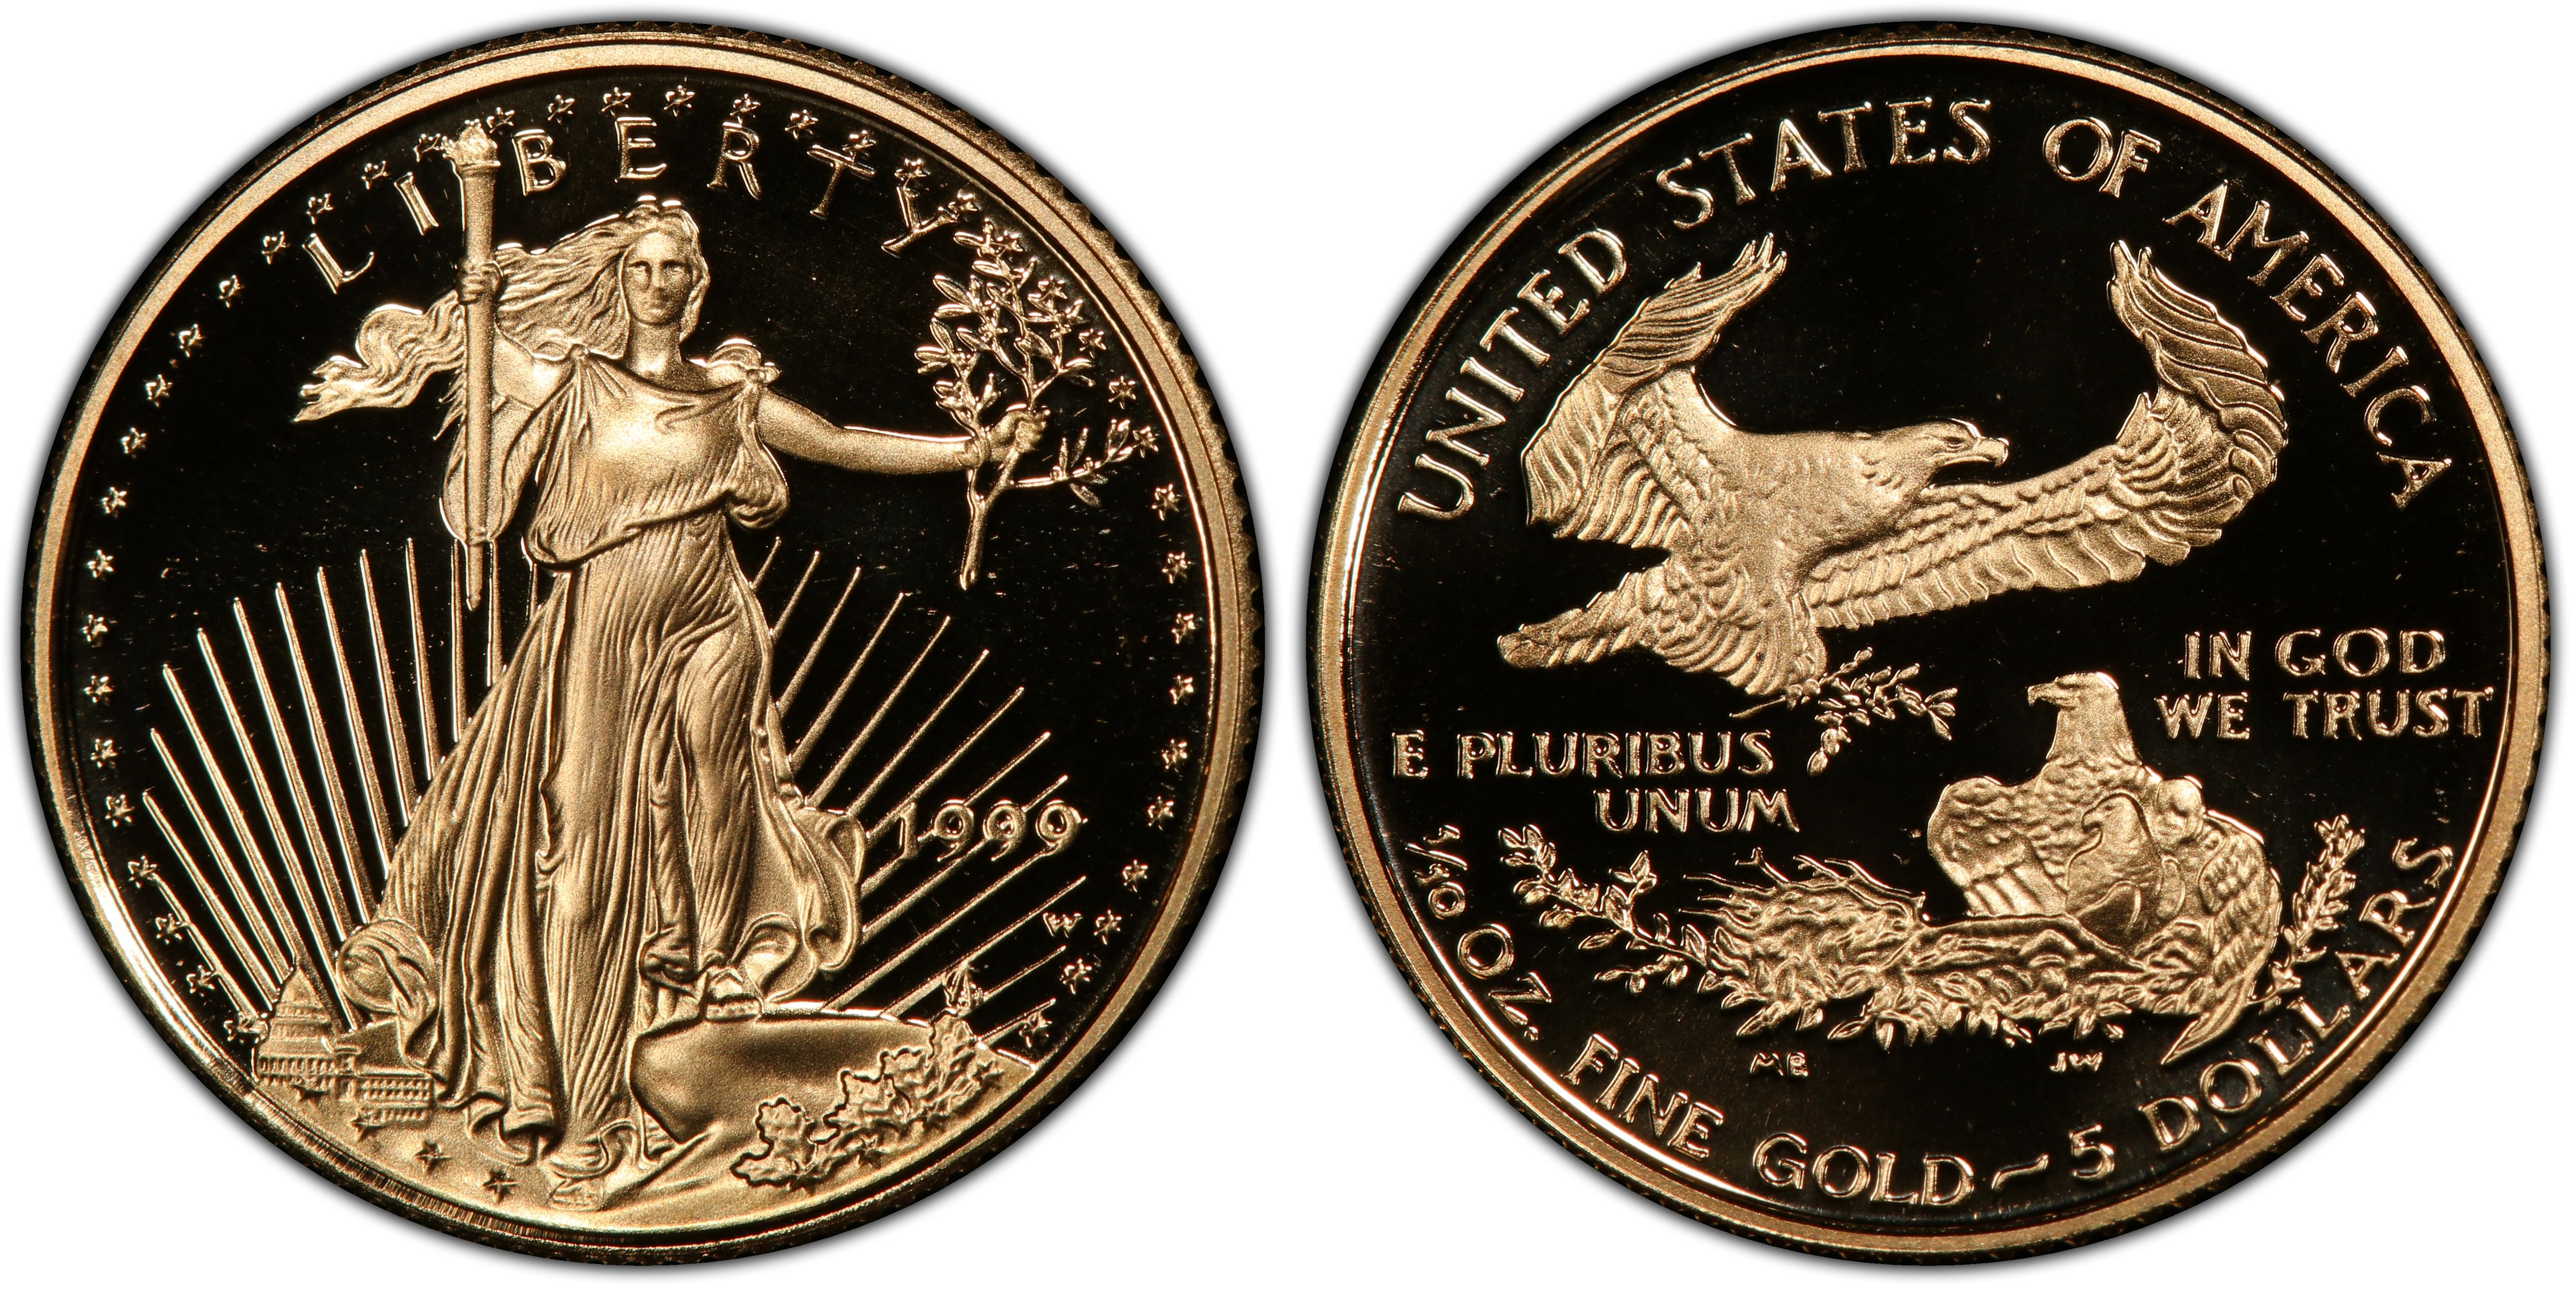 1999-W $5 Gold Eagle, DCAM (Proof) Gold Eagles - PCGS CoinFacts